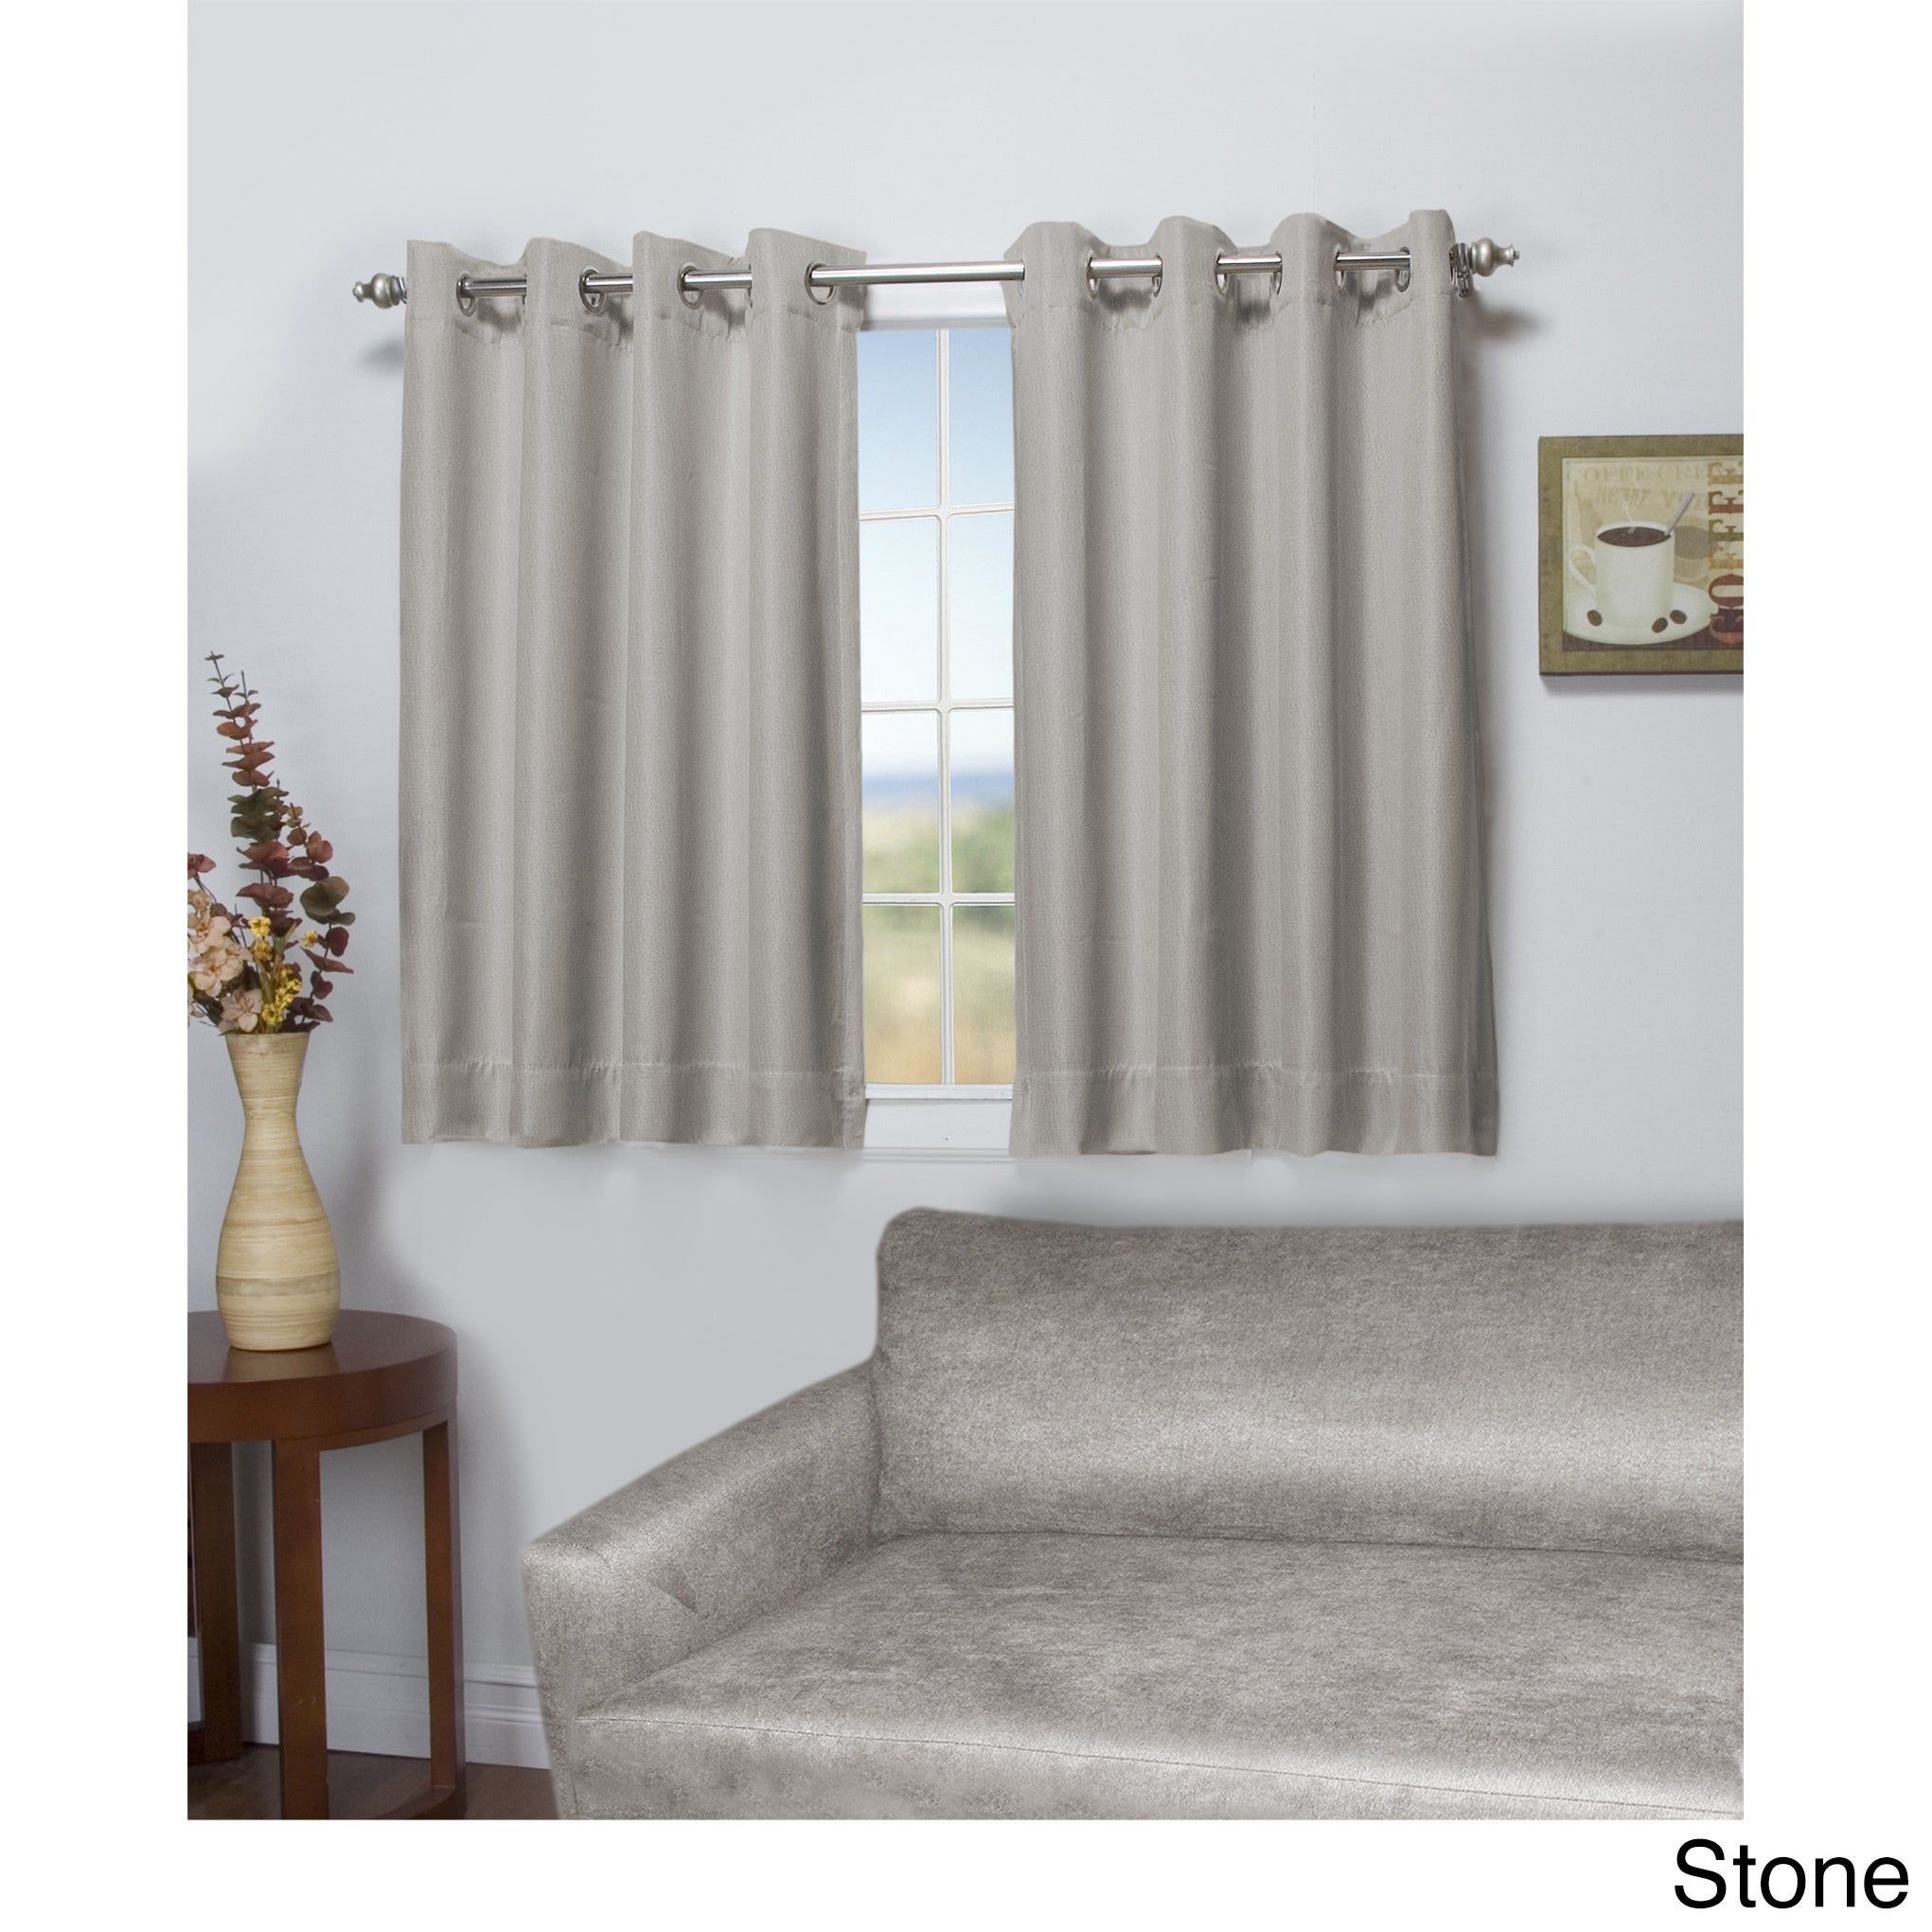 Tacoma Double Blackout Grommet Curtain Panel – Short Length For Tacoma Double Blackout Grommet Curtain Panels (View 1 of 30)